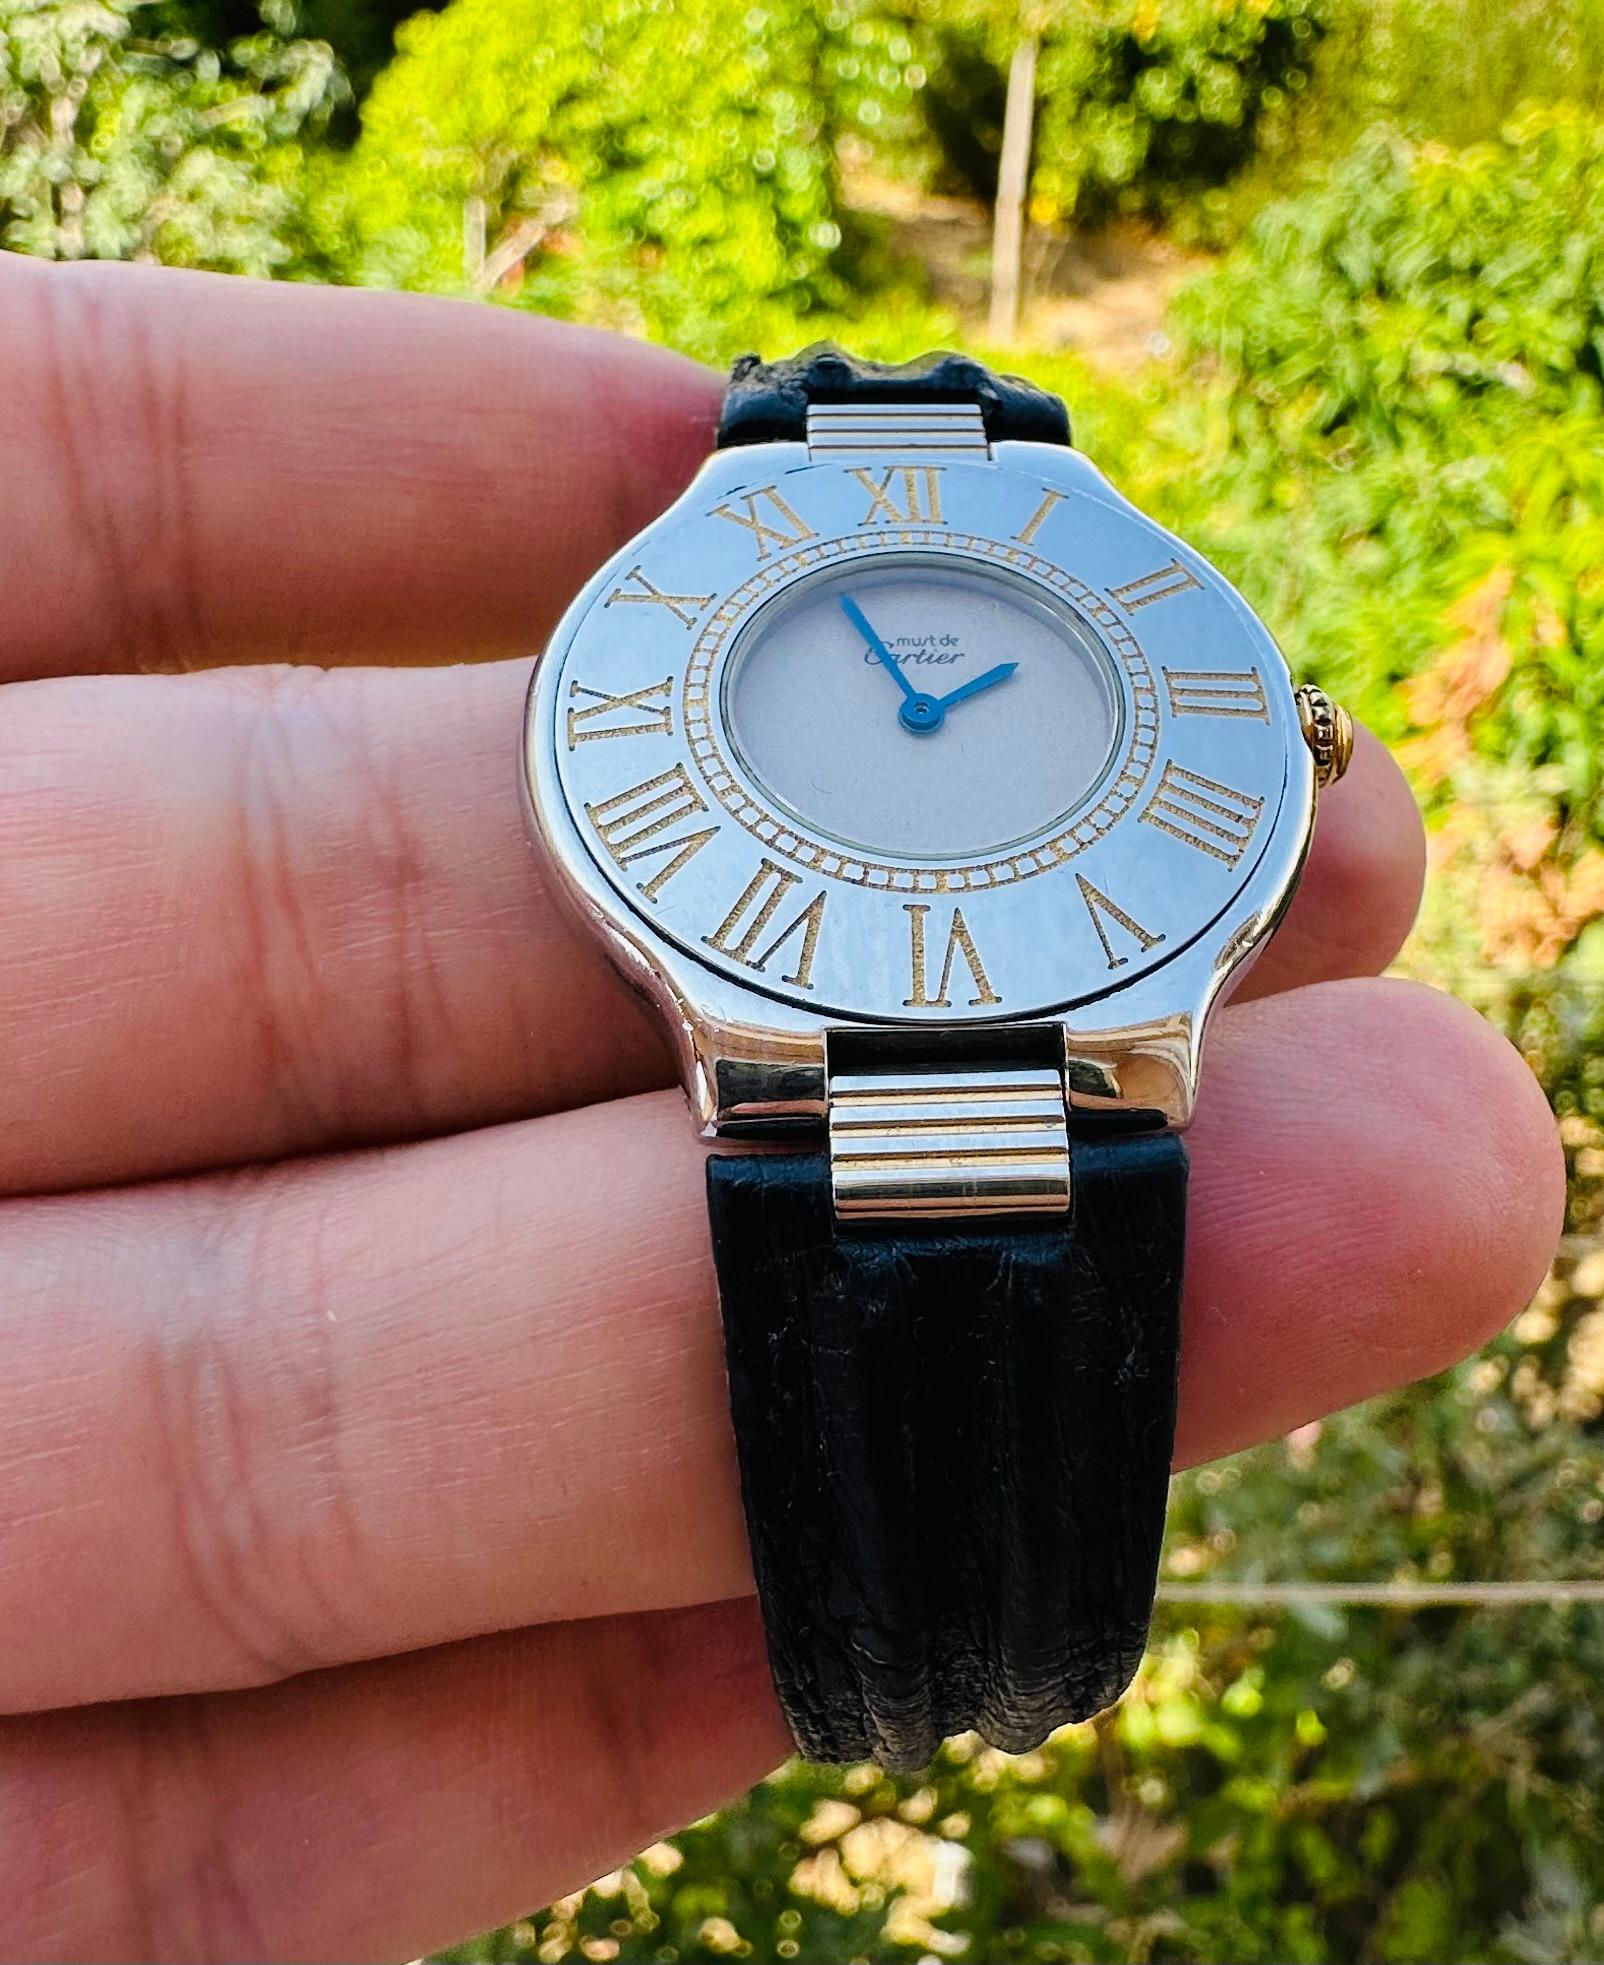 Brand: Cartier

Model: Cartier 21 Must de Cartier

Reference Number: 9011

Country Of Manufacture: Switzerland

Movement: Quartz

Case Material: Leather

Measurements : 31mm (without crown)

Band Type : Gold Plated &Stainless steel

Band Condition :